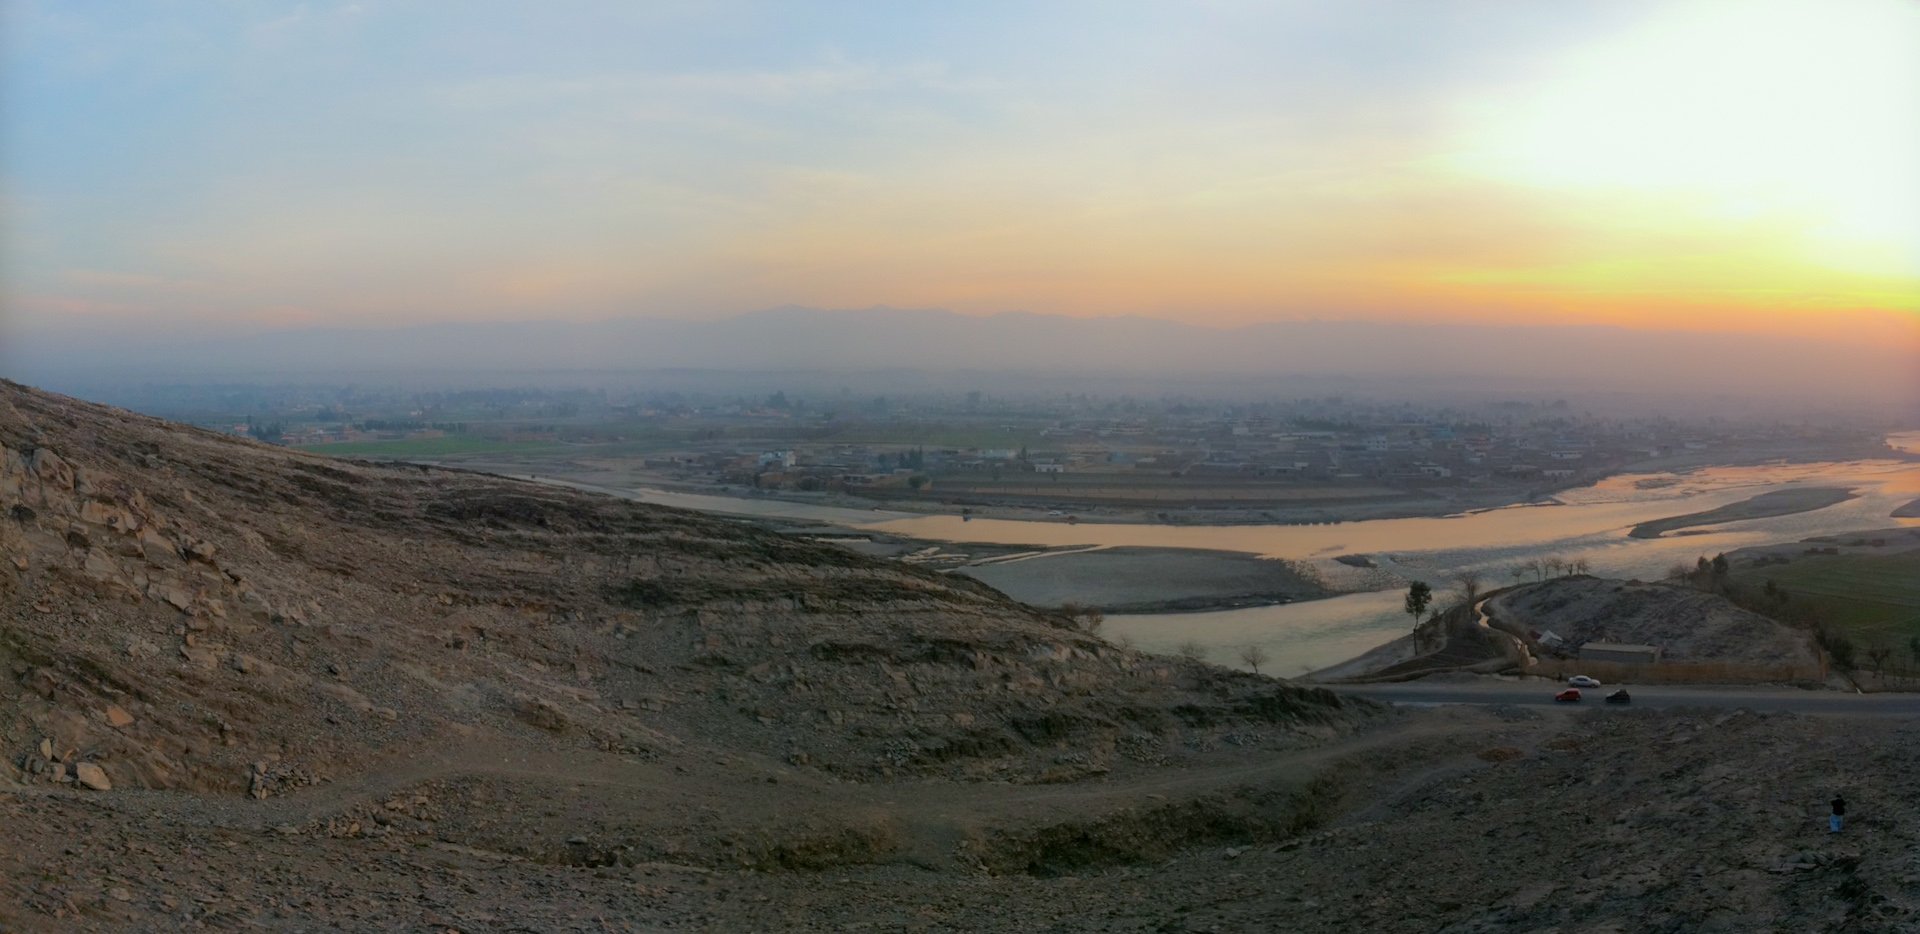 <p>The Kabul river flowing past Jalalabad [image by Peretz Partensky]</p>